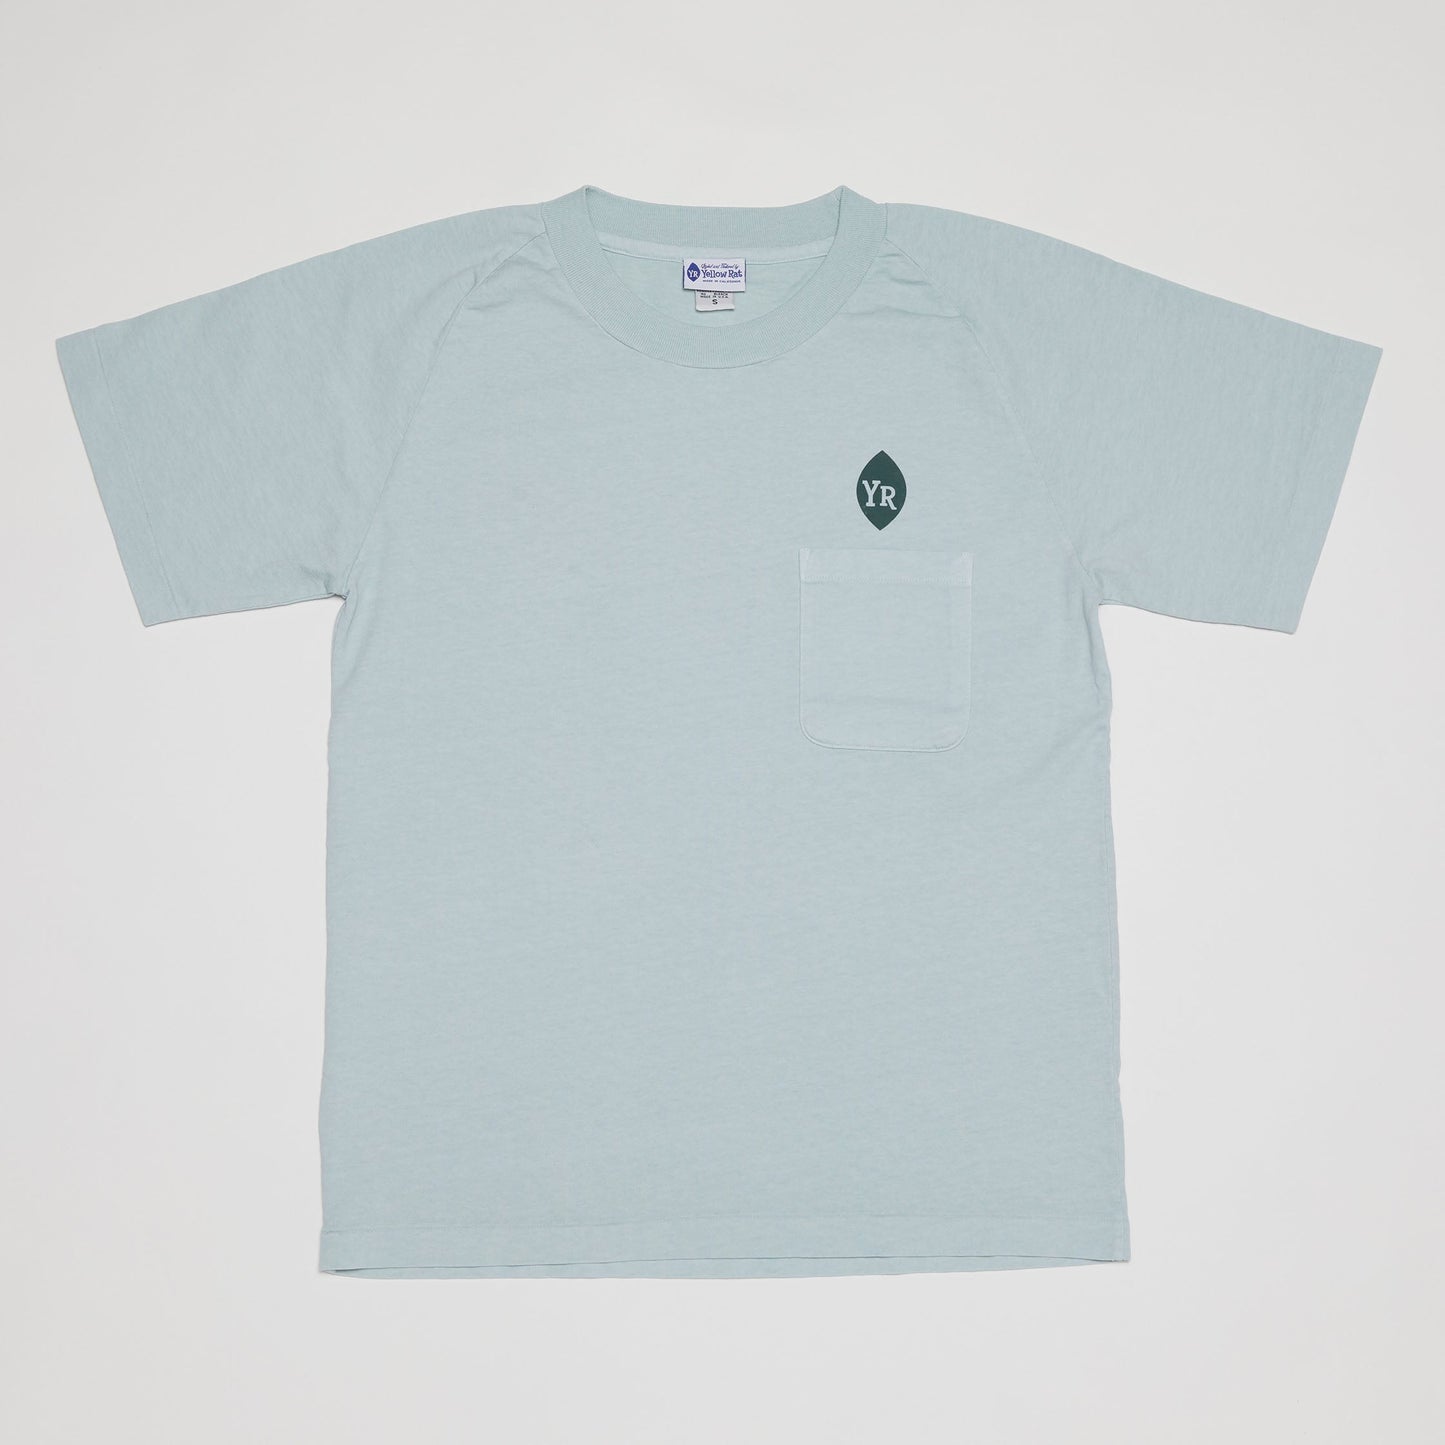 Some Like It Smooth T-Shirt II (Dusty Blue)